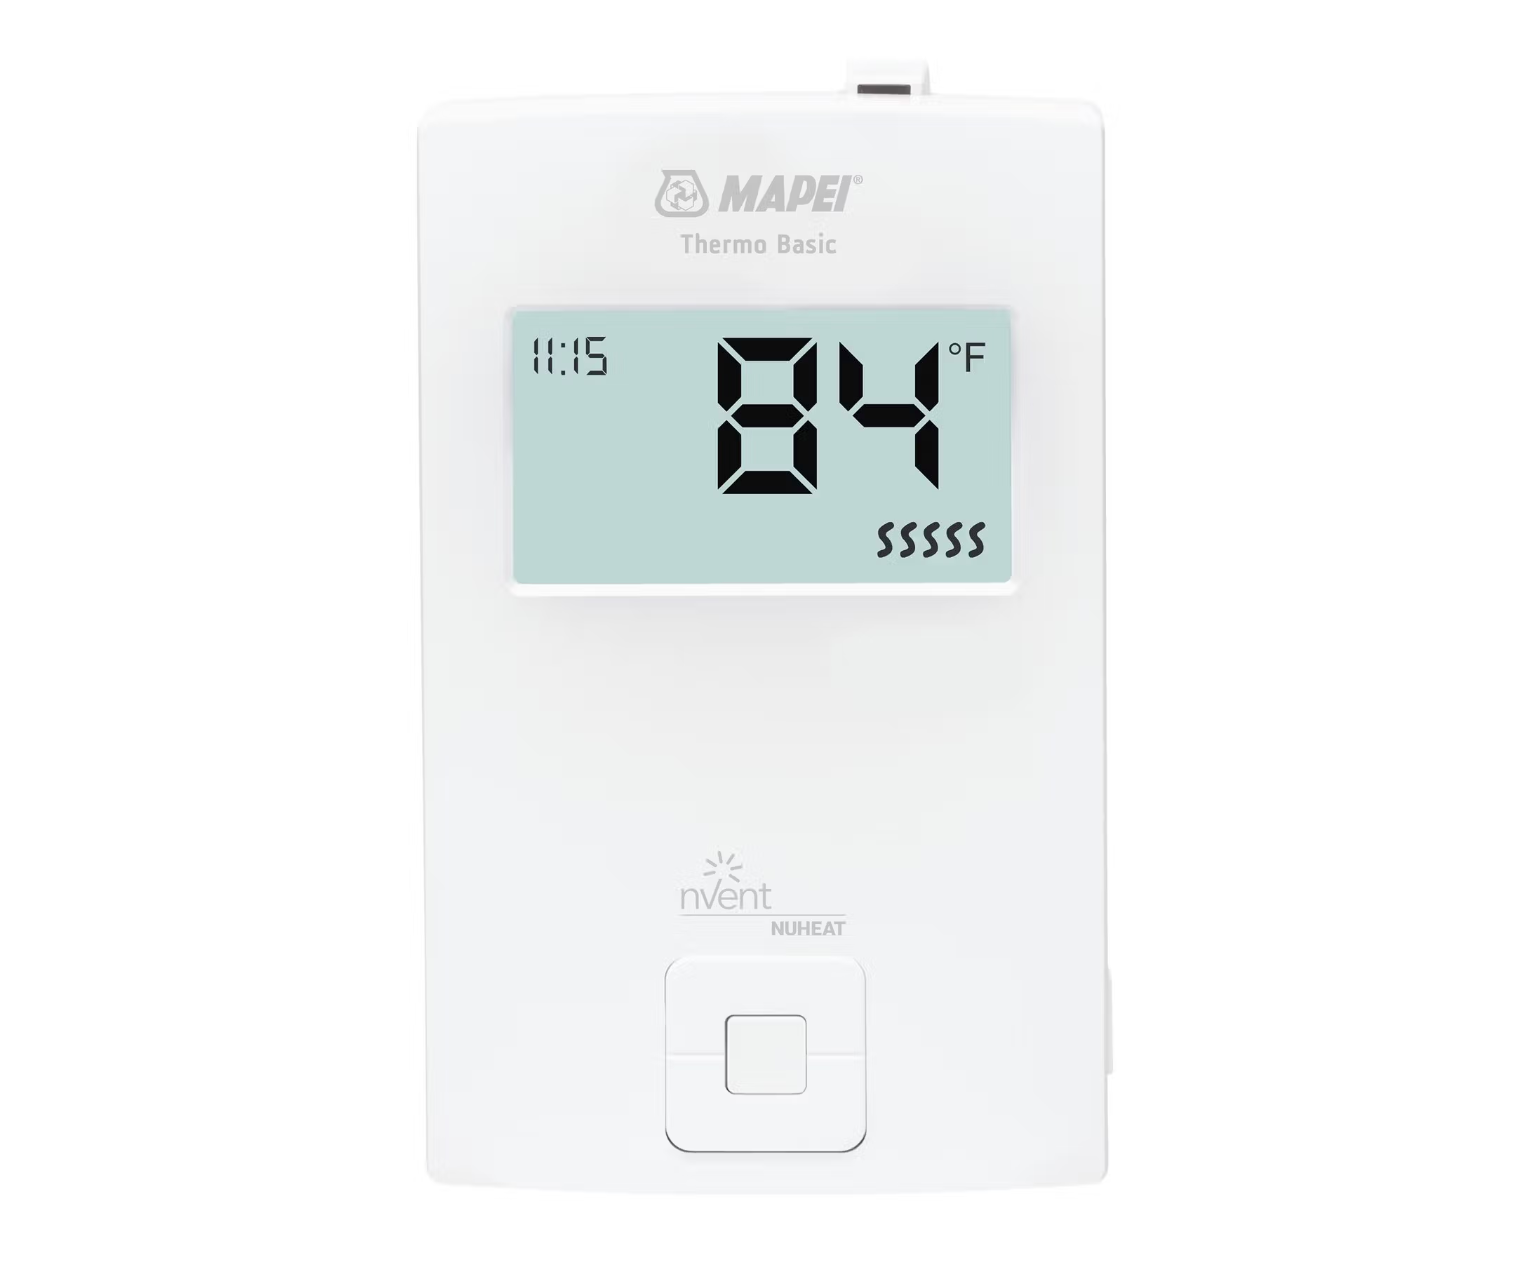 Mapei Mapeheat Thermo Basic Thermostat for non-programmable underfloor heating (SKU: 2855401)